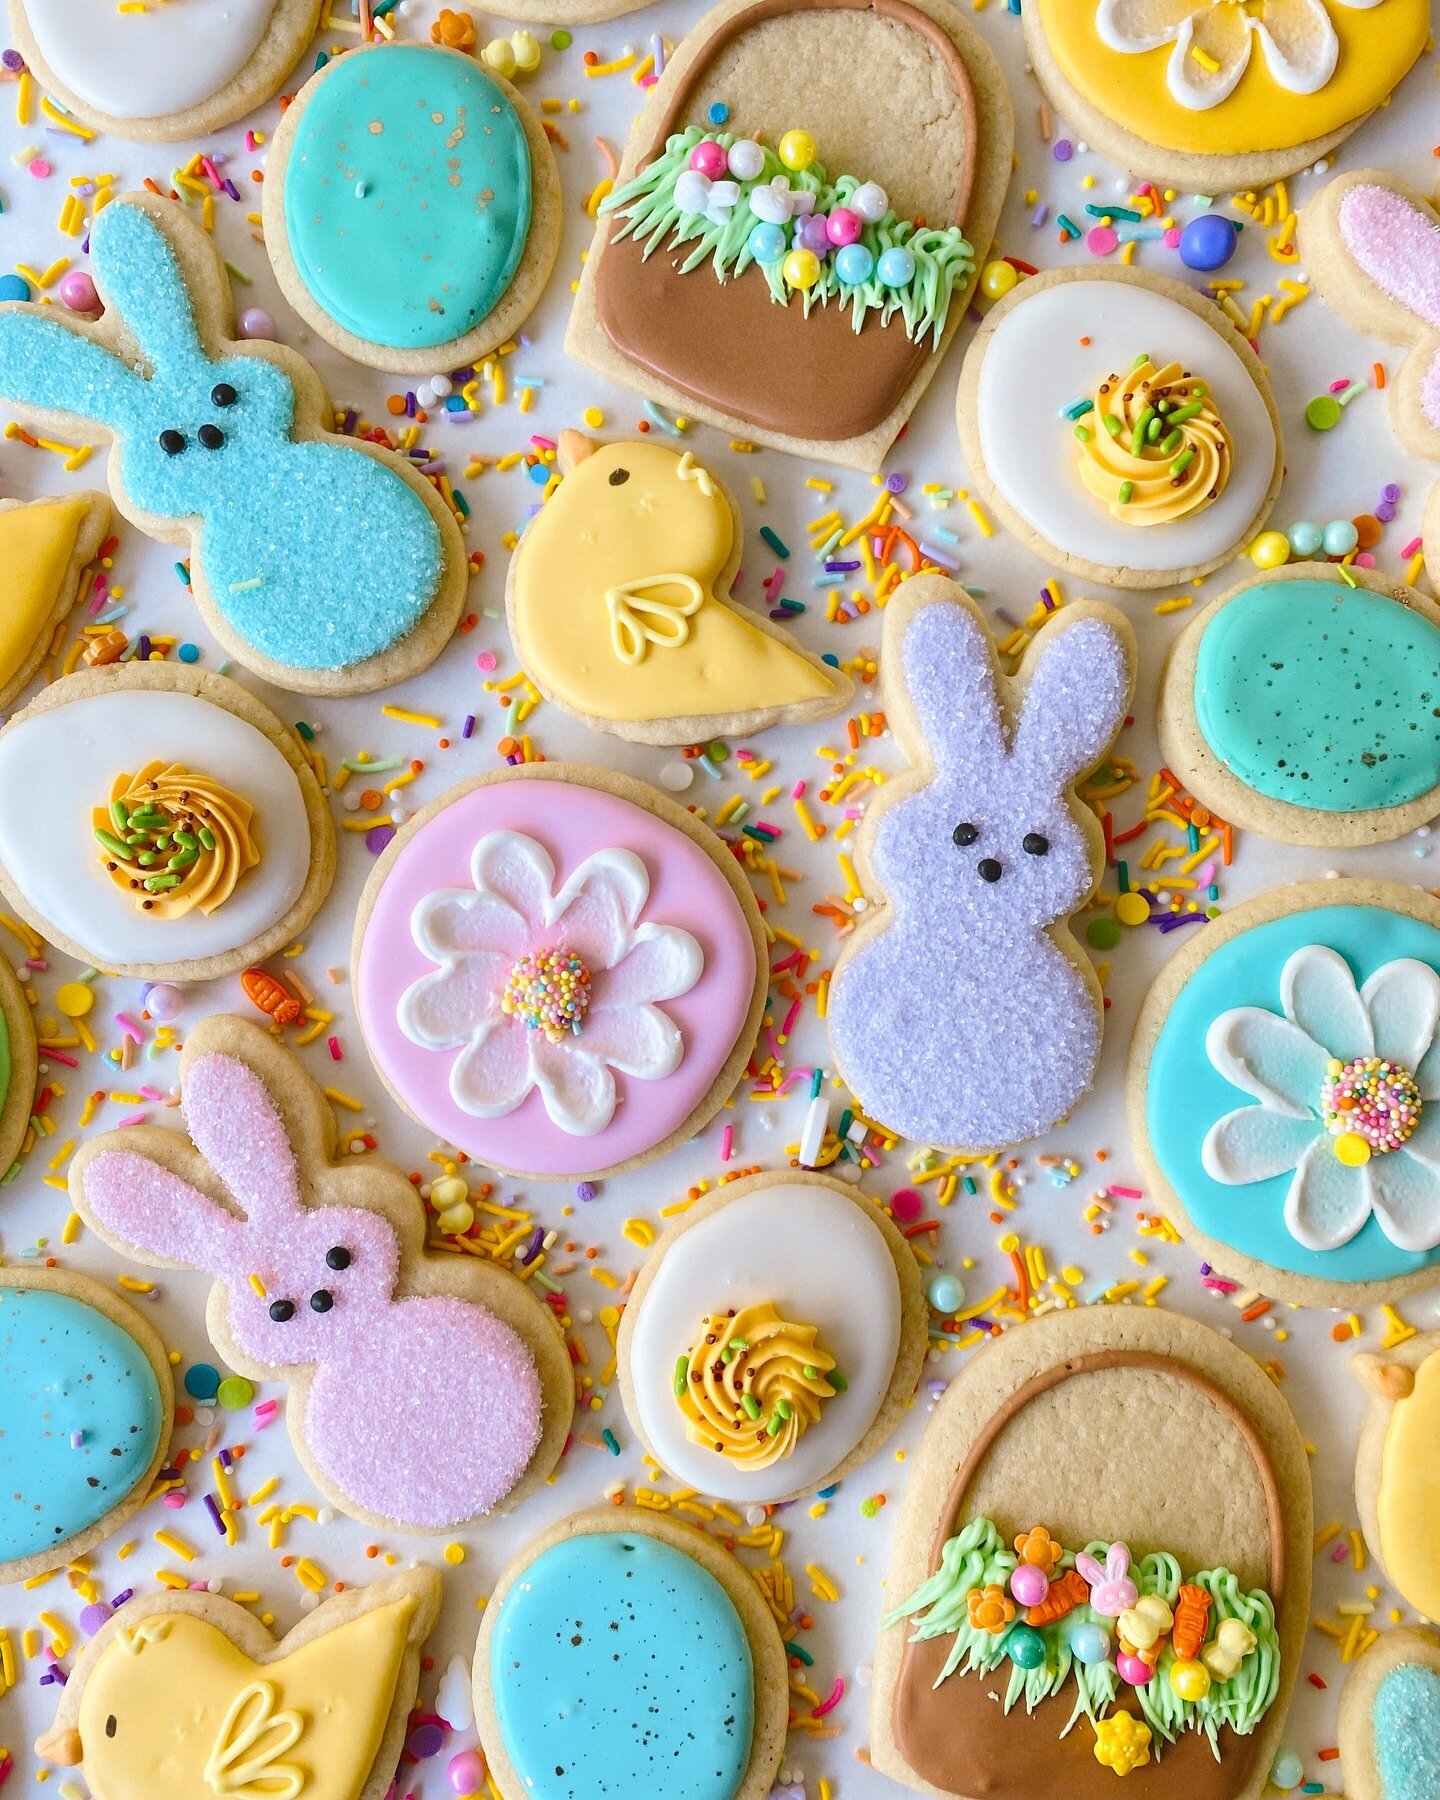 Easter Collection has just been restocked on our website &amp; is going fast! Here&rsquo;s the lil holiday lineup:
- lil robin&rsquo;s egg 🪺 
- pastel peep ✨
- brown bunny 🐰 
- daisy 🌼 
- Easter basket 🧺 
- lil chick 🐥 
- deviled egg 🥚 (no lil 